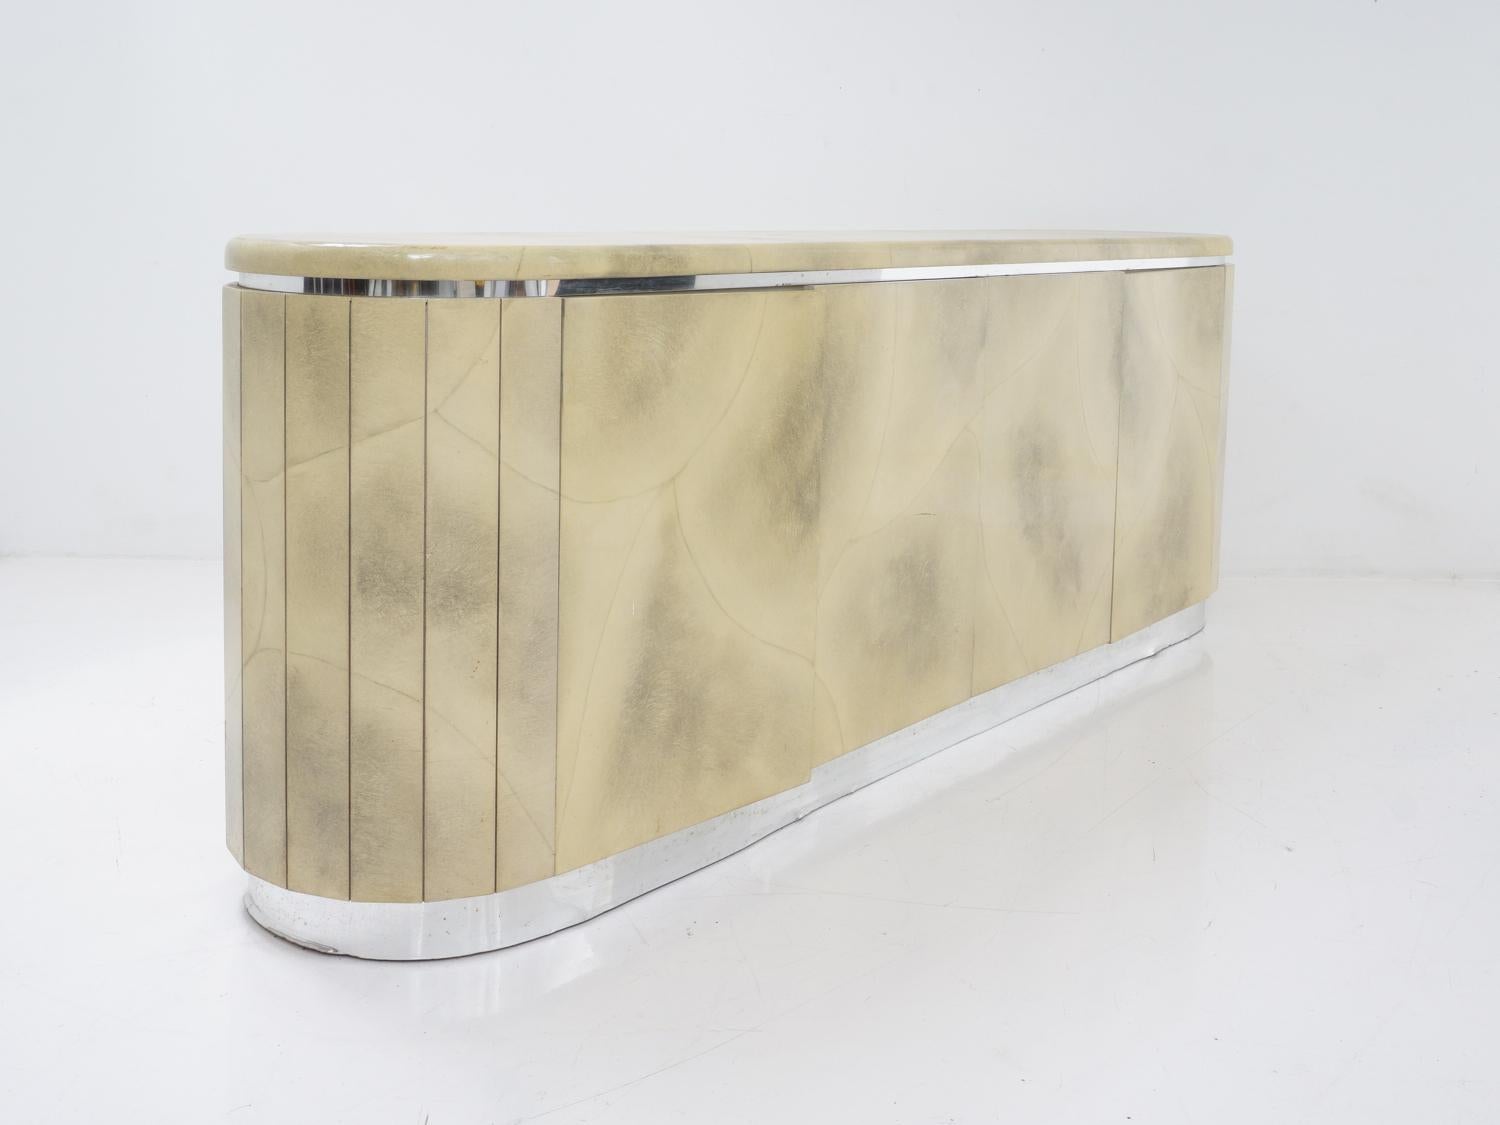 Glamorous and faux fabulous: a credenza that channels your inner celebrity without harming any goats.

- 31.5